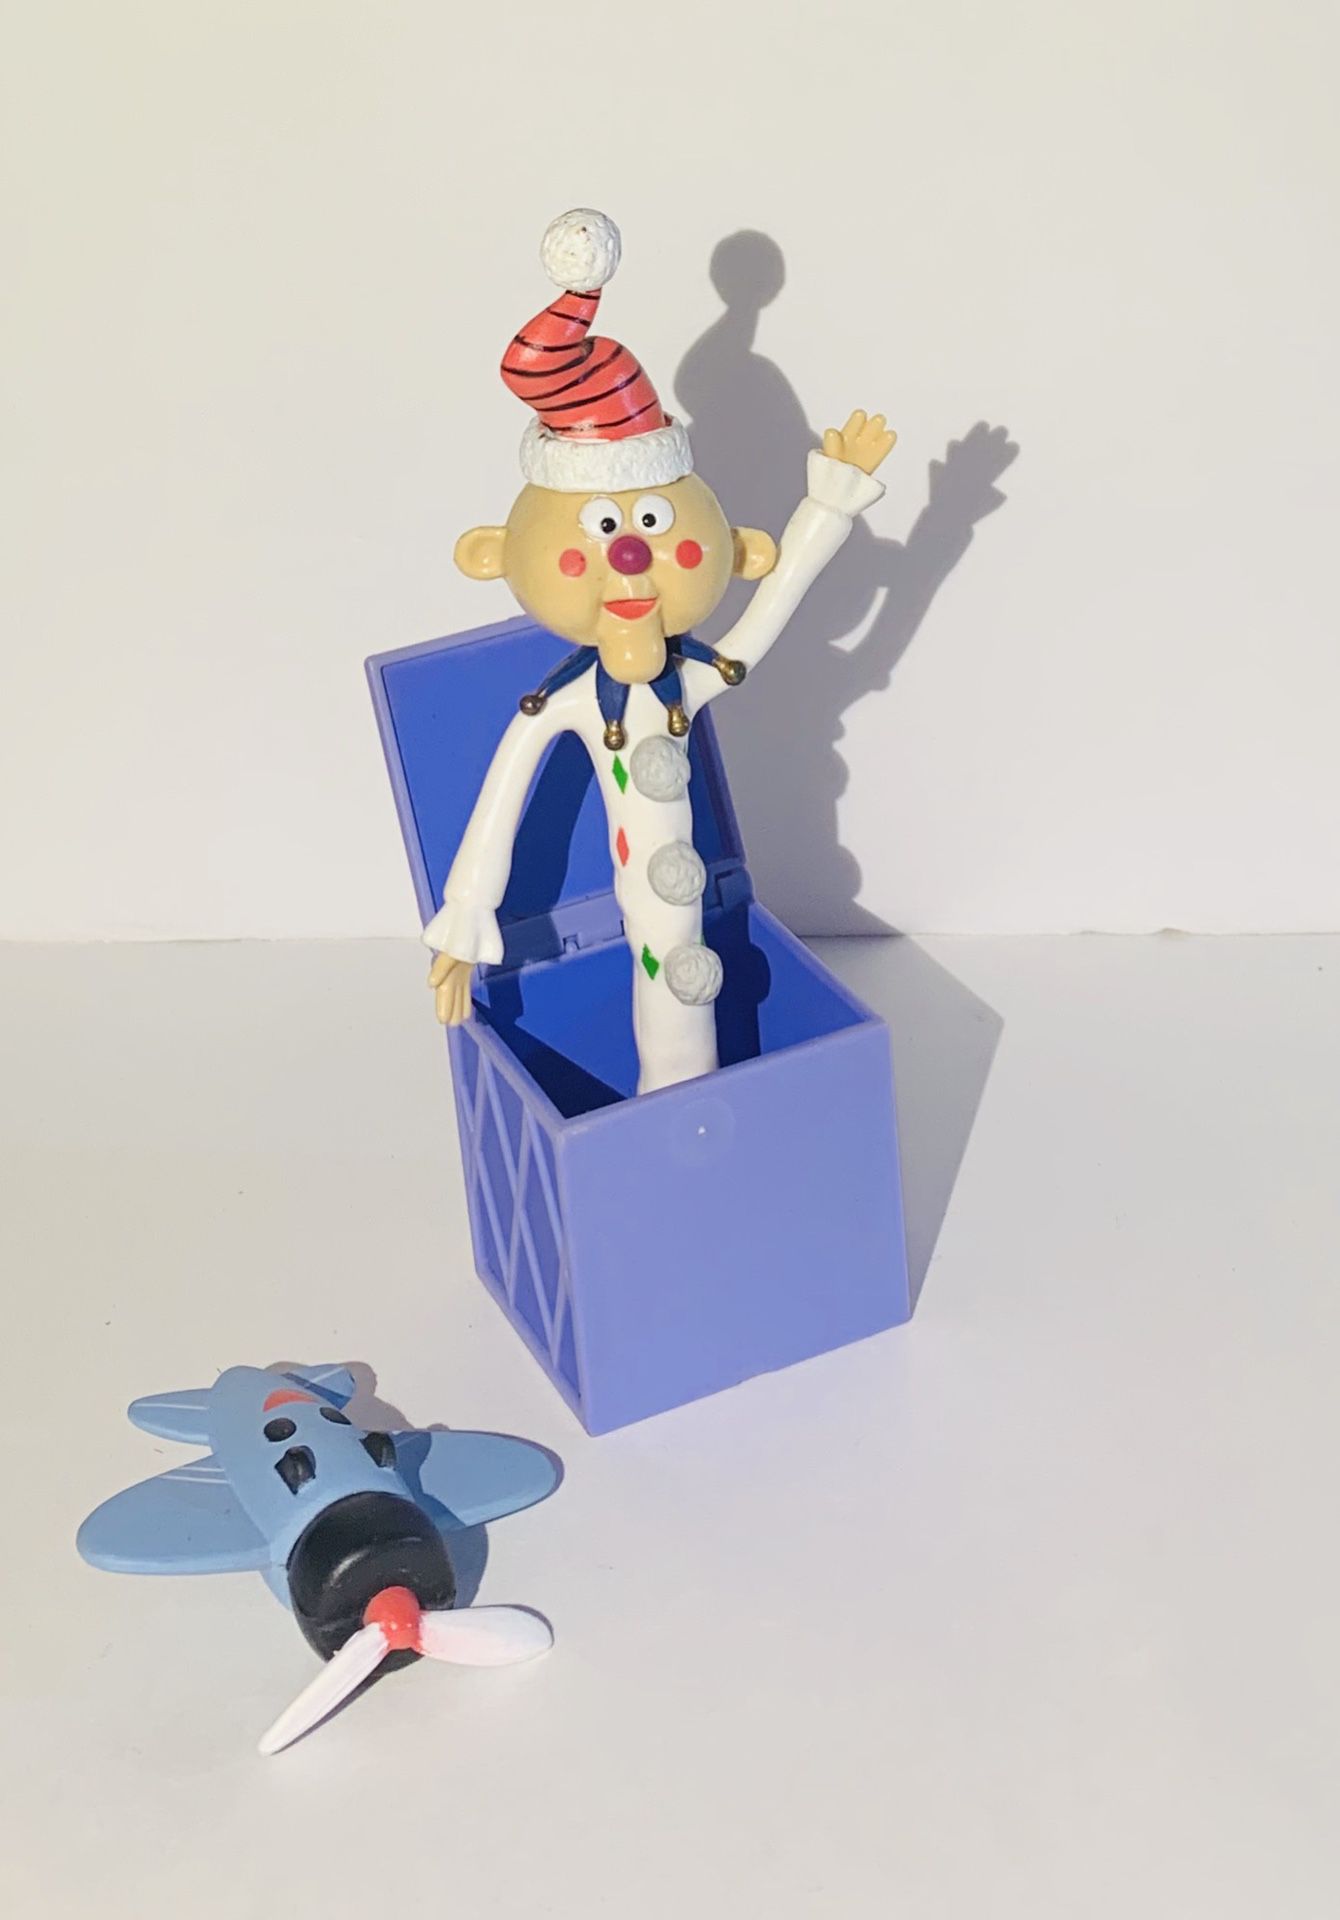 The Island of Misfit Toys - Charlie in the Box